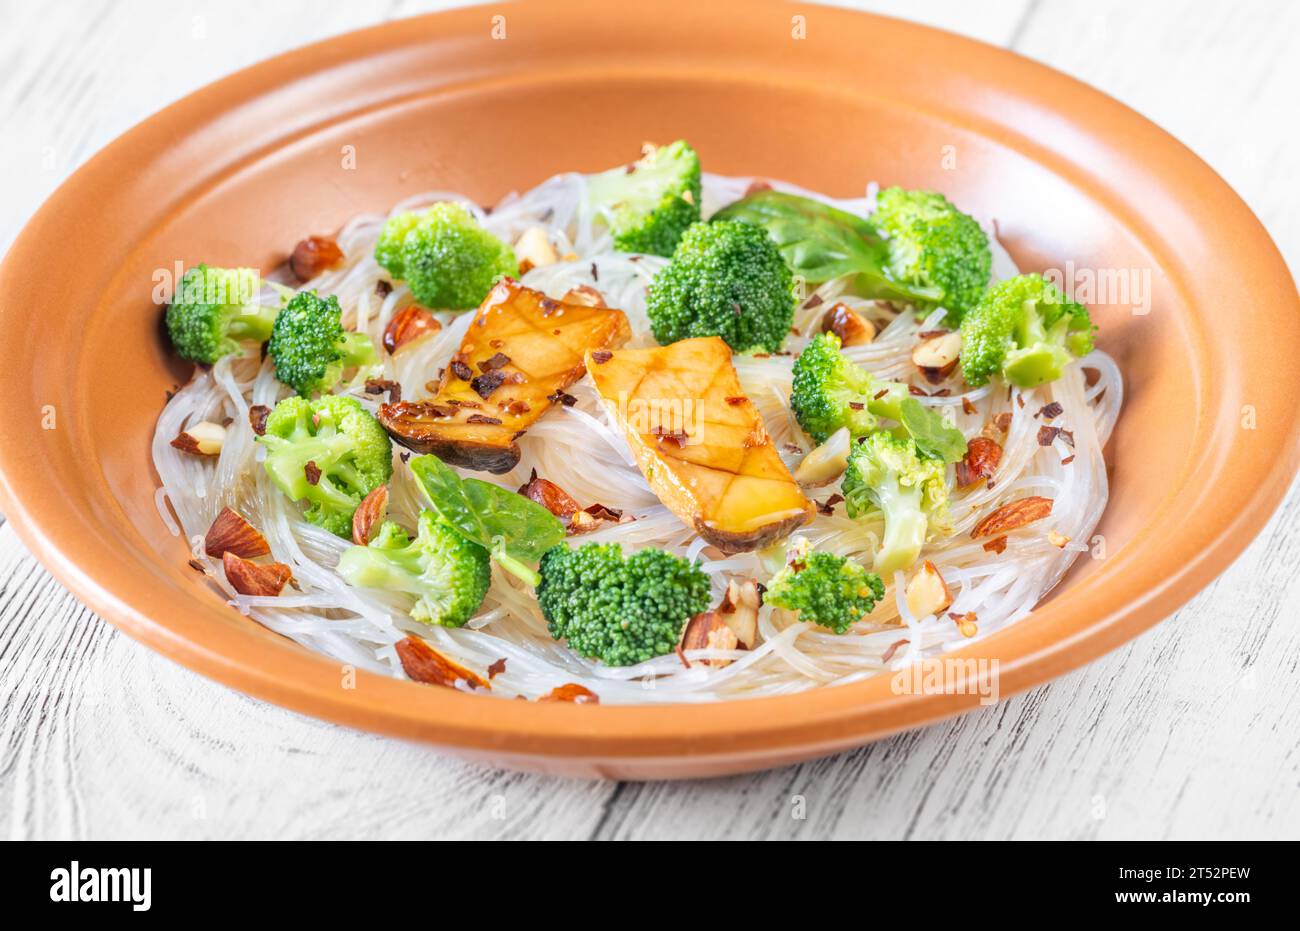 Cellophane noodles with broccoli, almonds and mushrooms Stock Photo